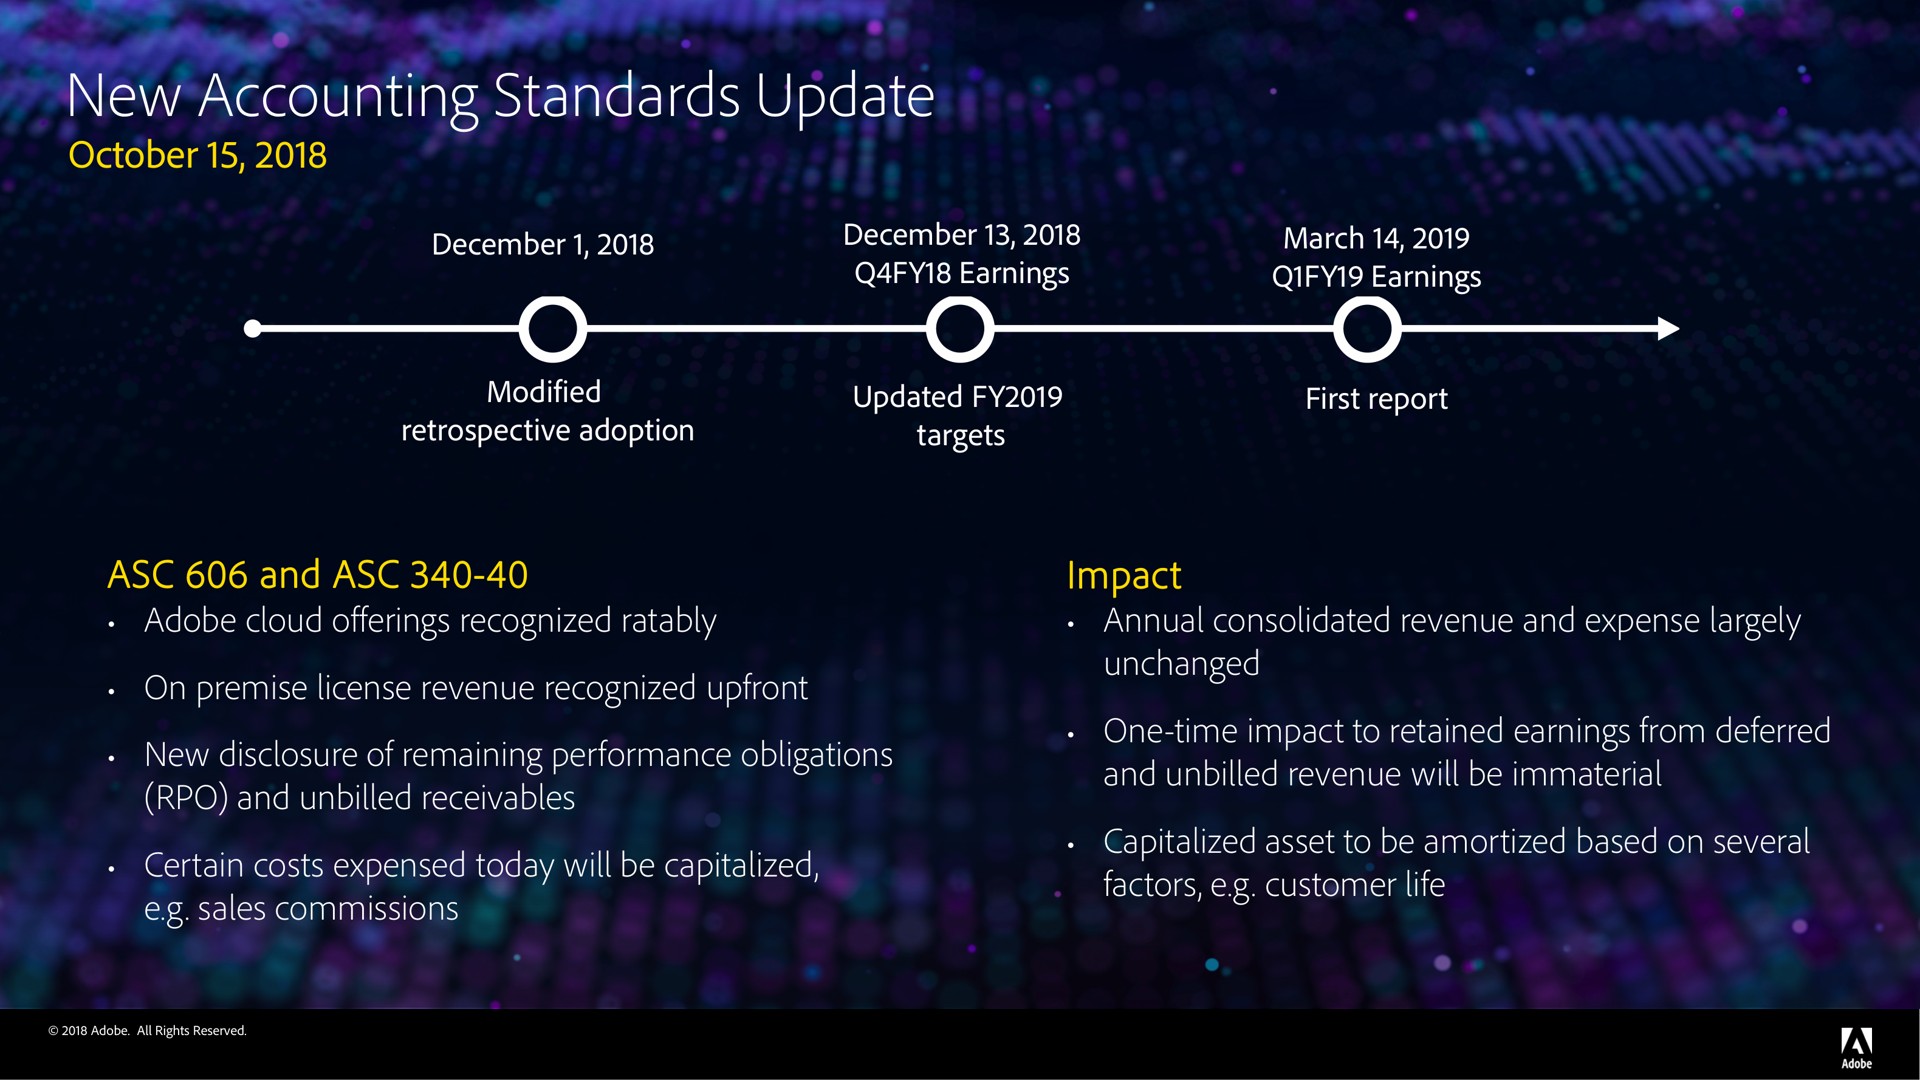 new accounting standards update | Adobe